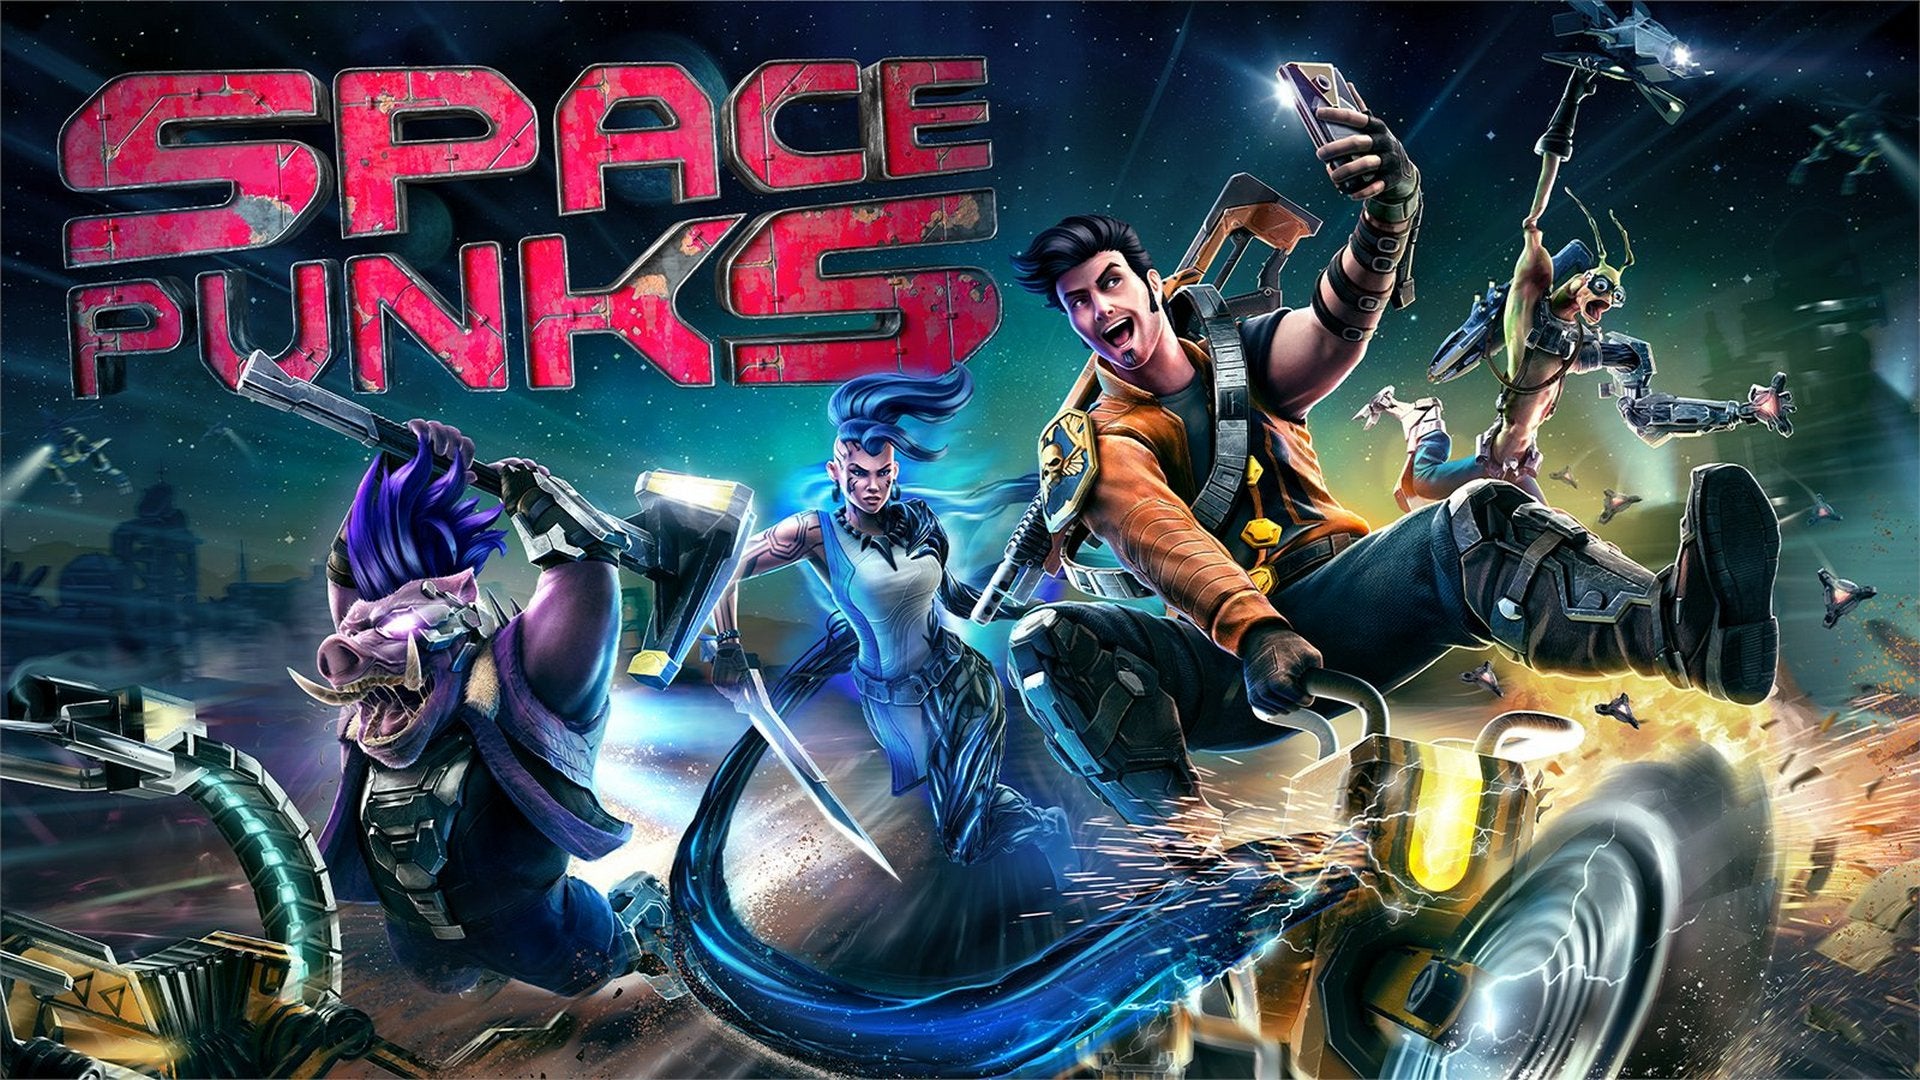 Artwork for Space Punks, showing four characters side by side as they strike different poses